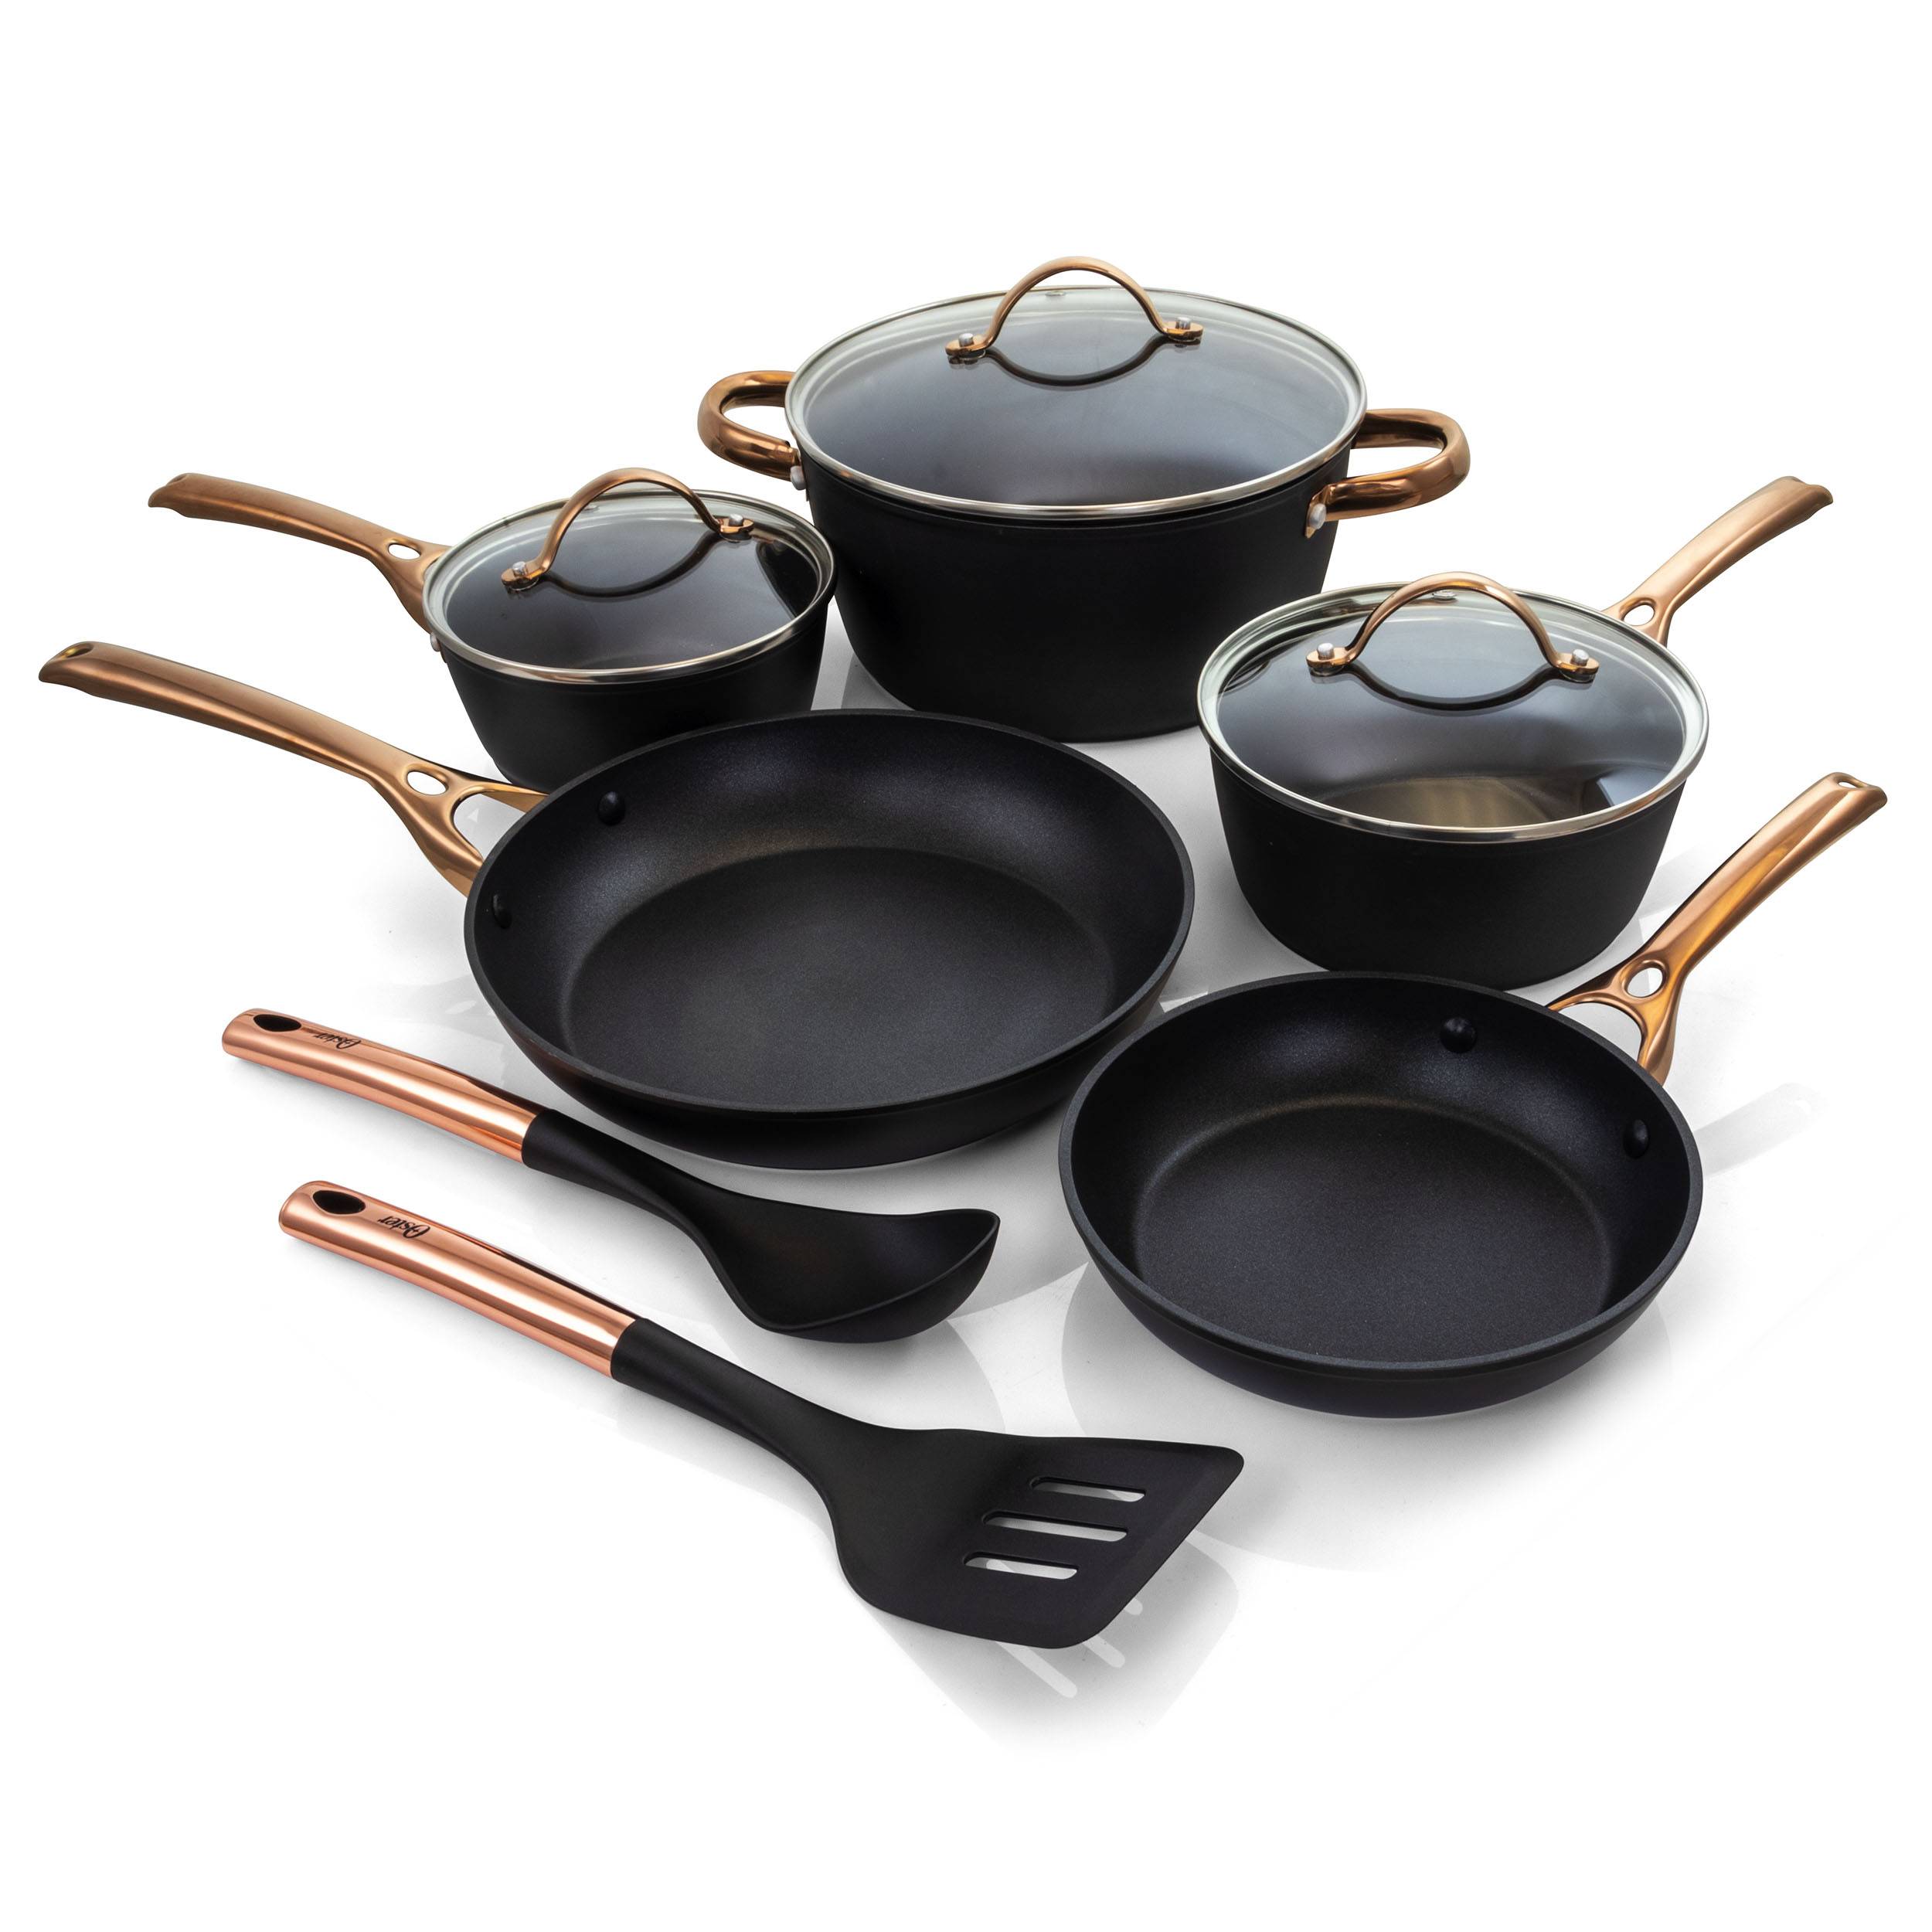  T-fal Initiatives Ceramic Nonstick Fry Pan 12 Inch Pots and Pans,  Cookware Gold: Home & Kitchen